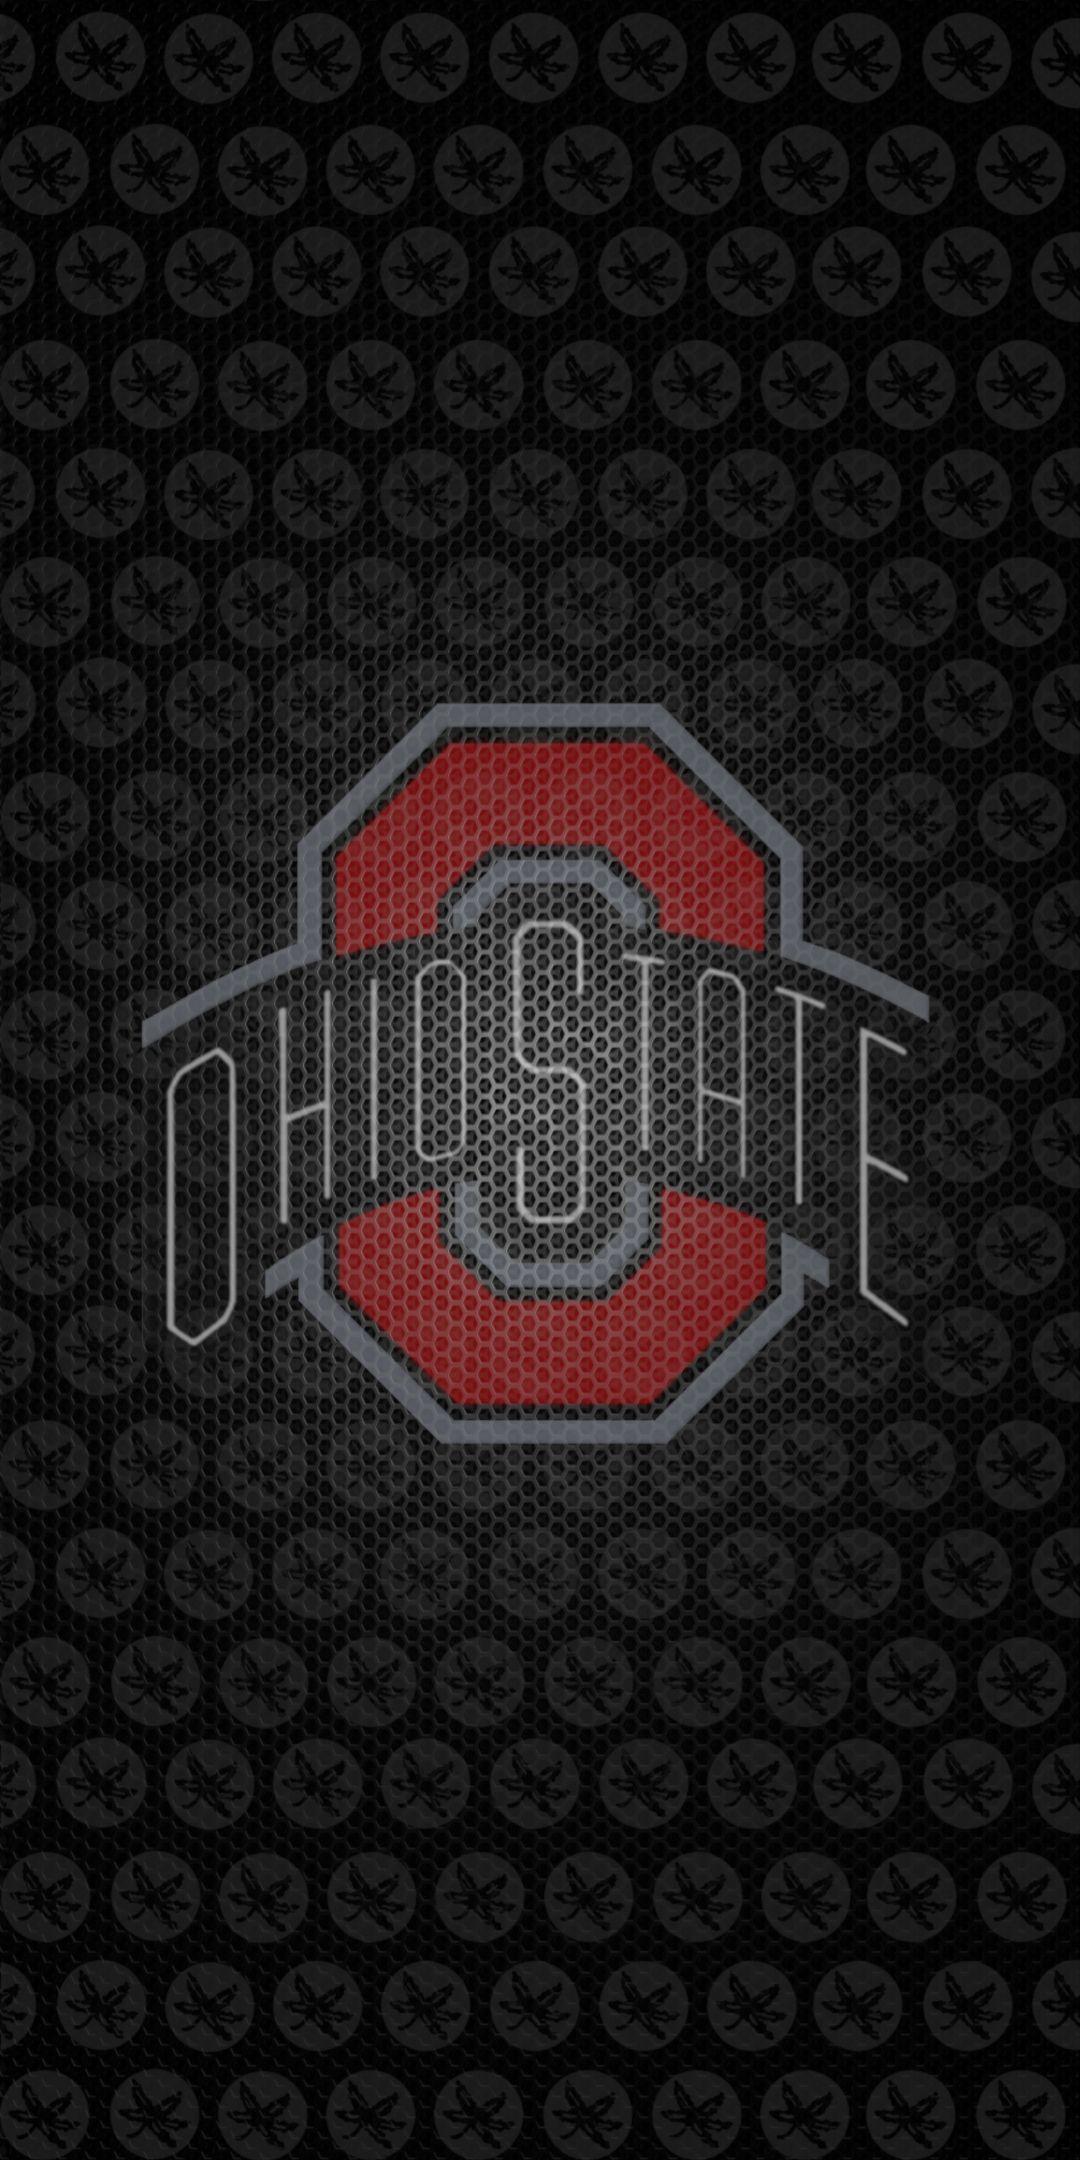 OSU Wallpaper 150 For Moto G6 Plus. OHIO STATE PHONE WALLPAPERS